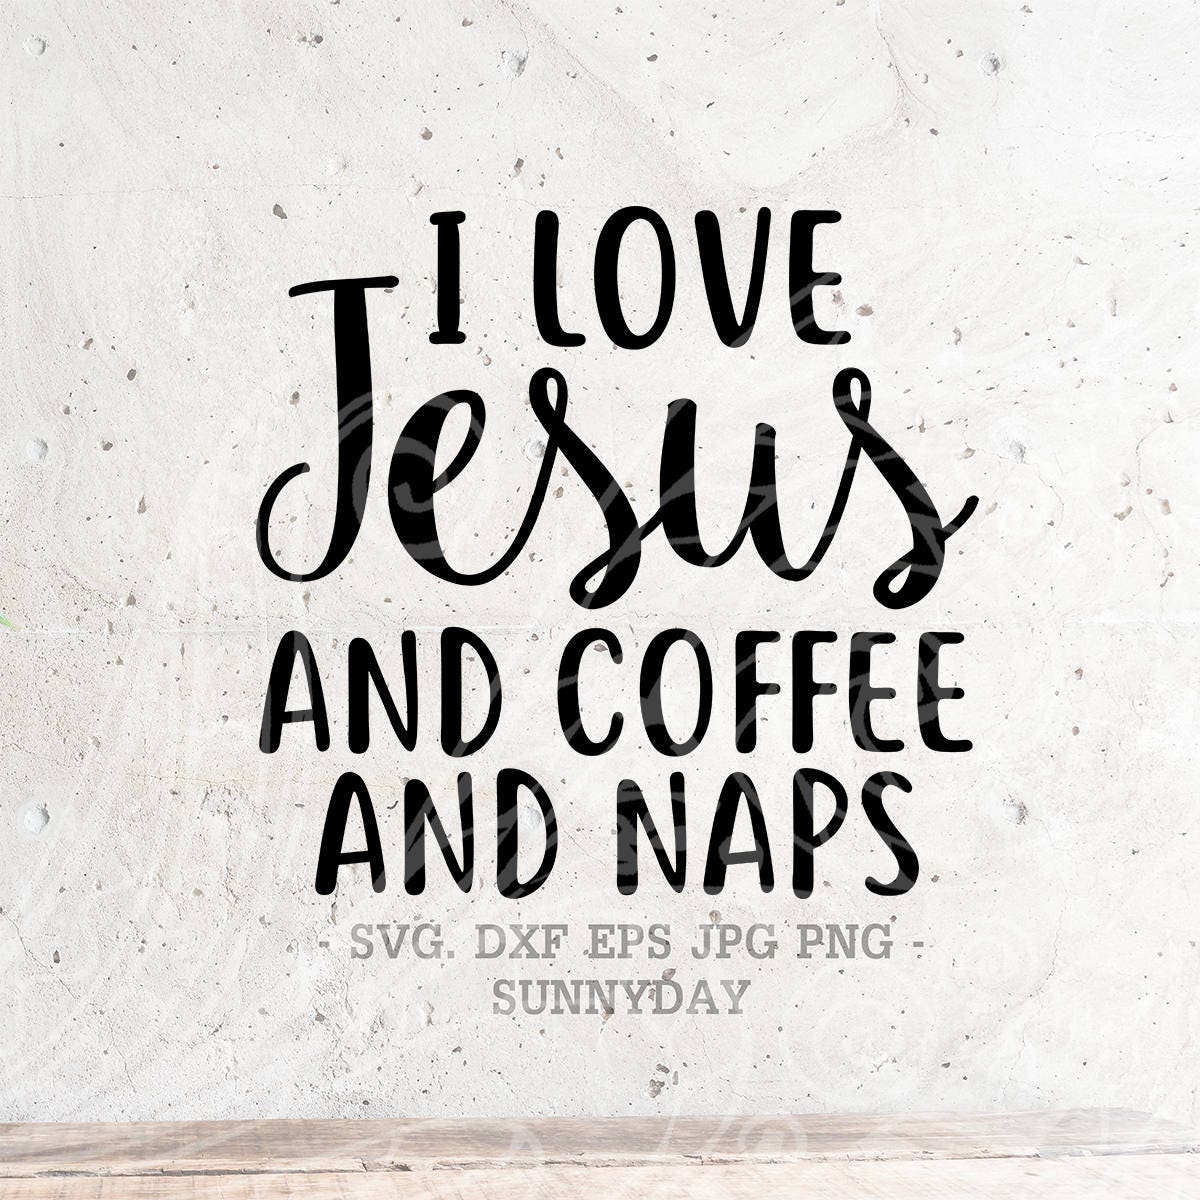 I Love Jesus and Coffee and Naps SVG File DXF Silhouette Print